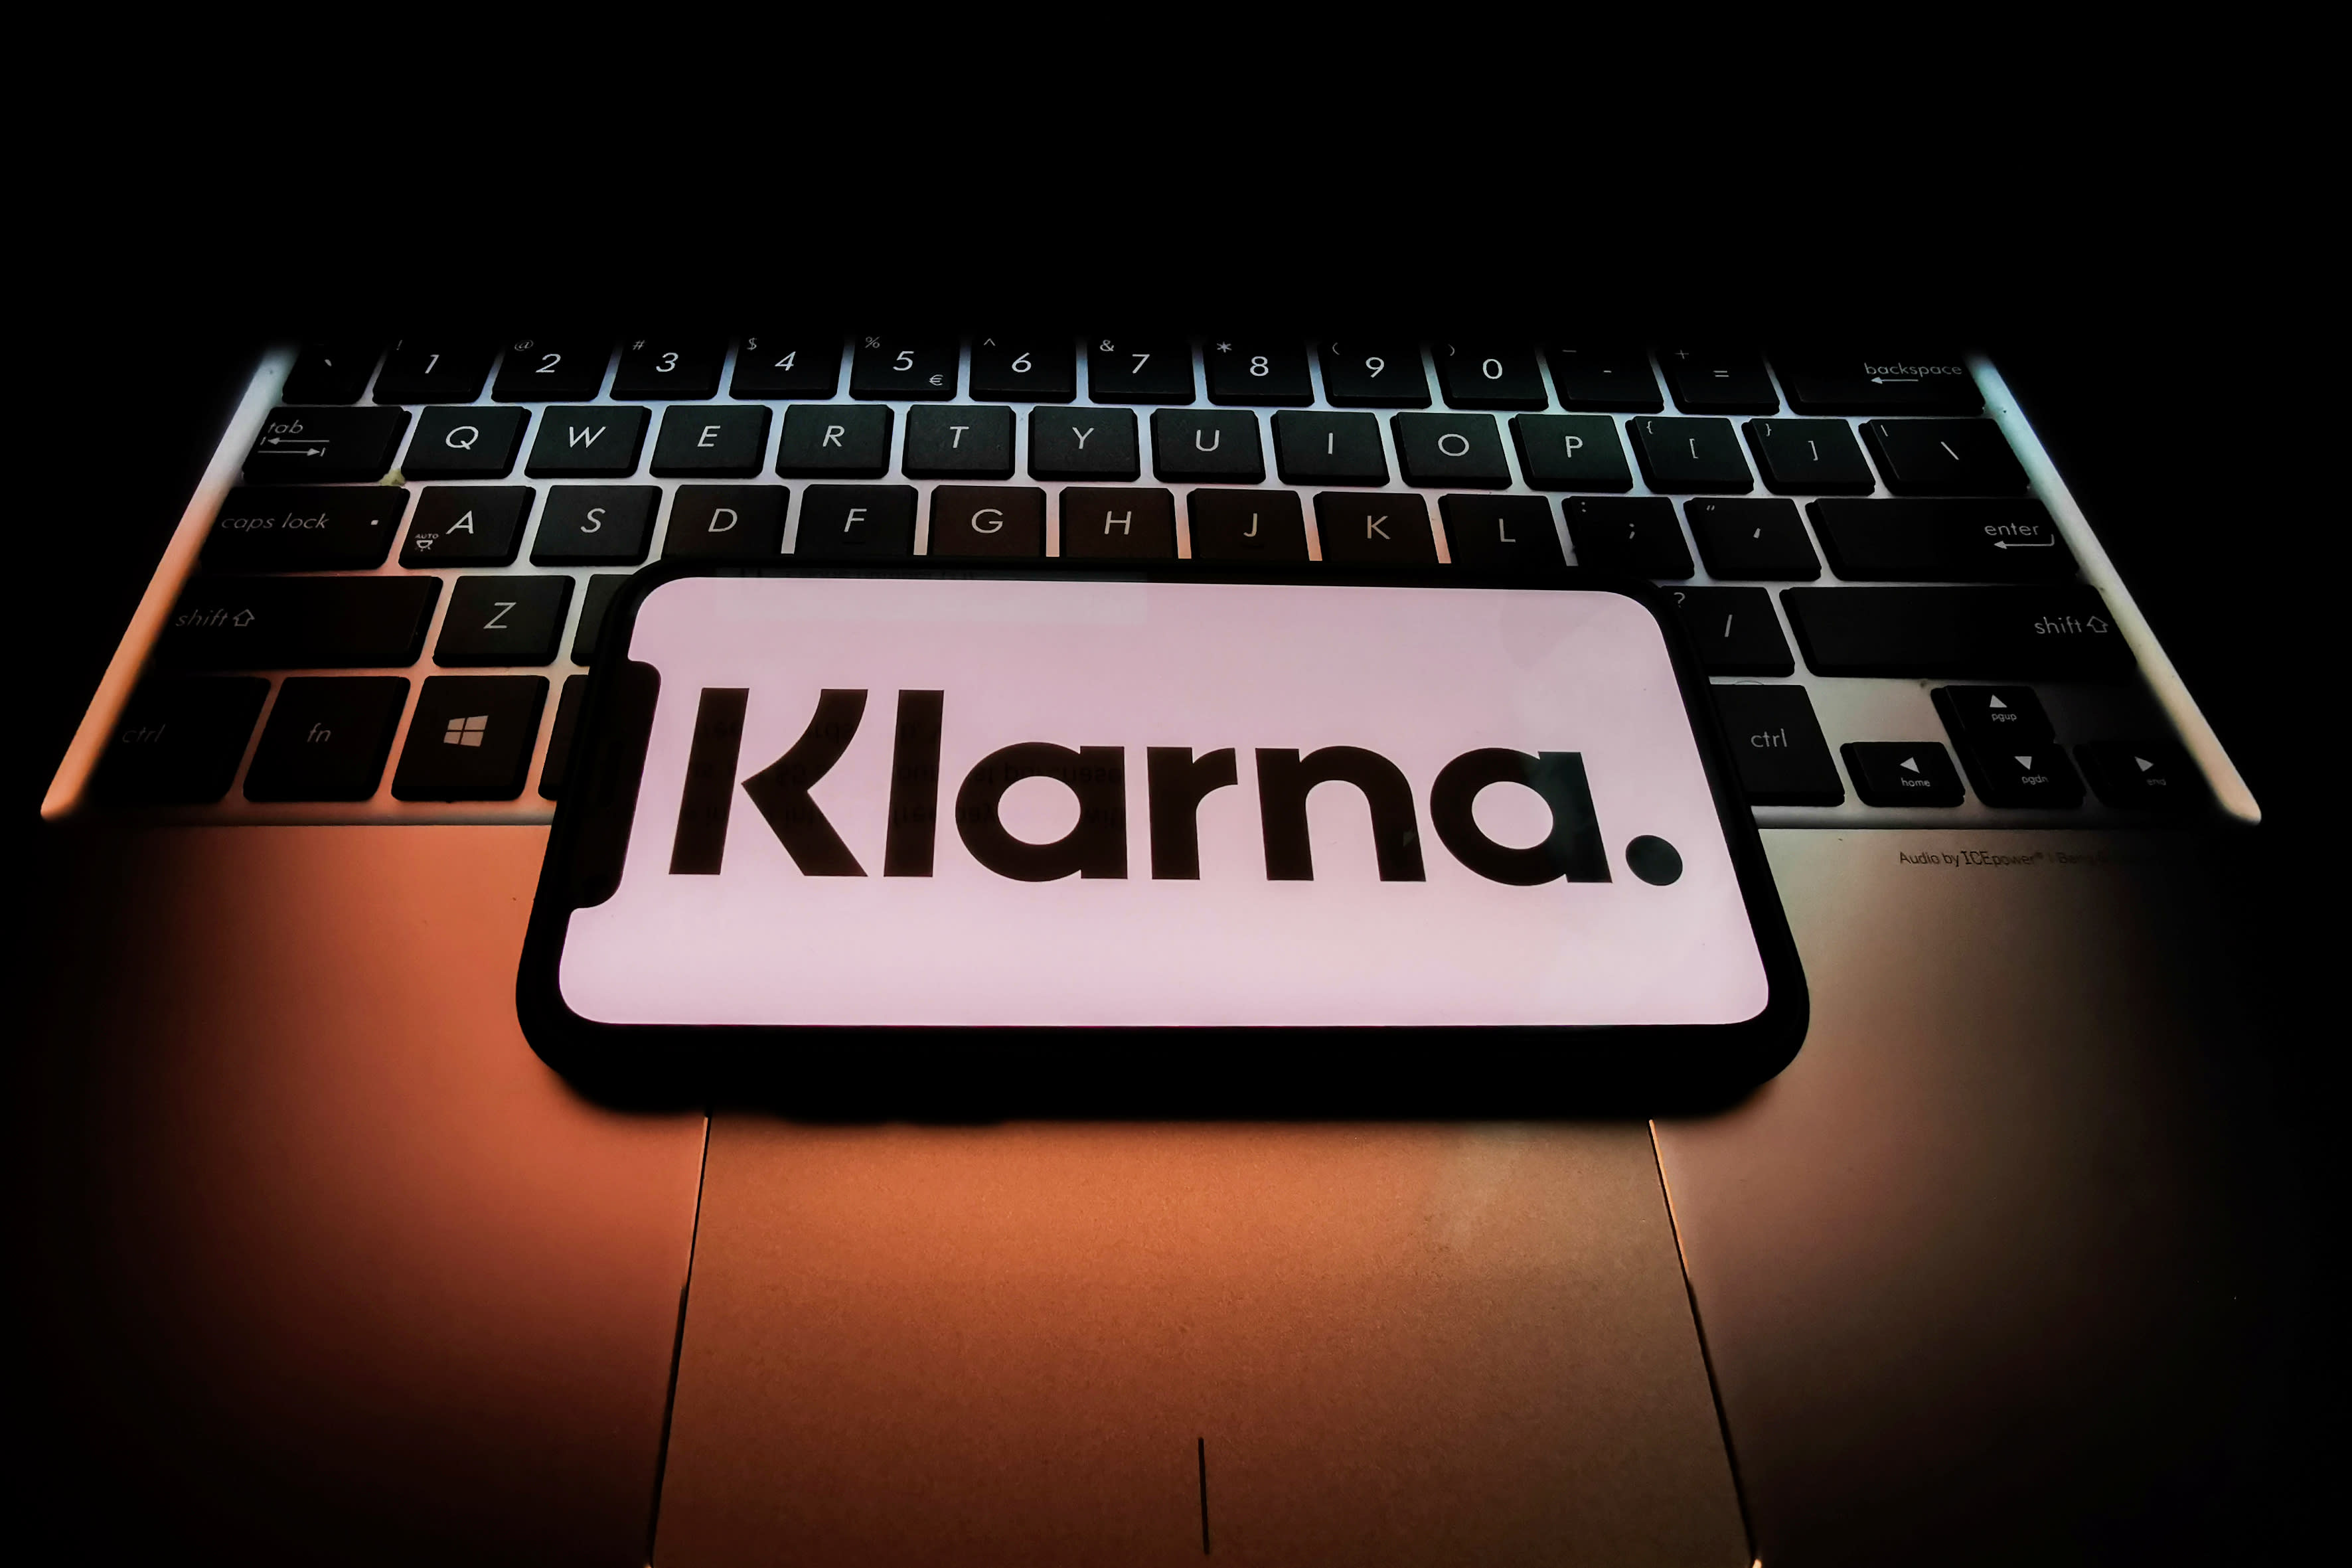 Buy now, pay later Klarna reduces losses by 67% and increases revenues by 21%